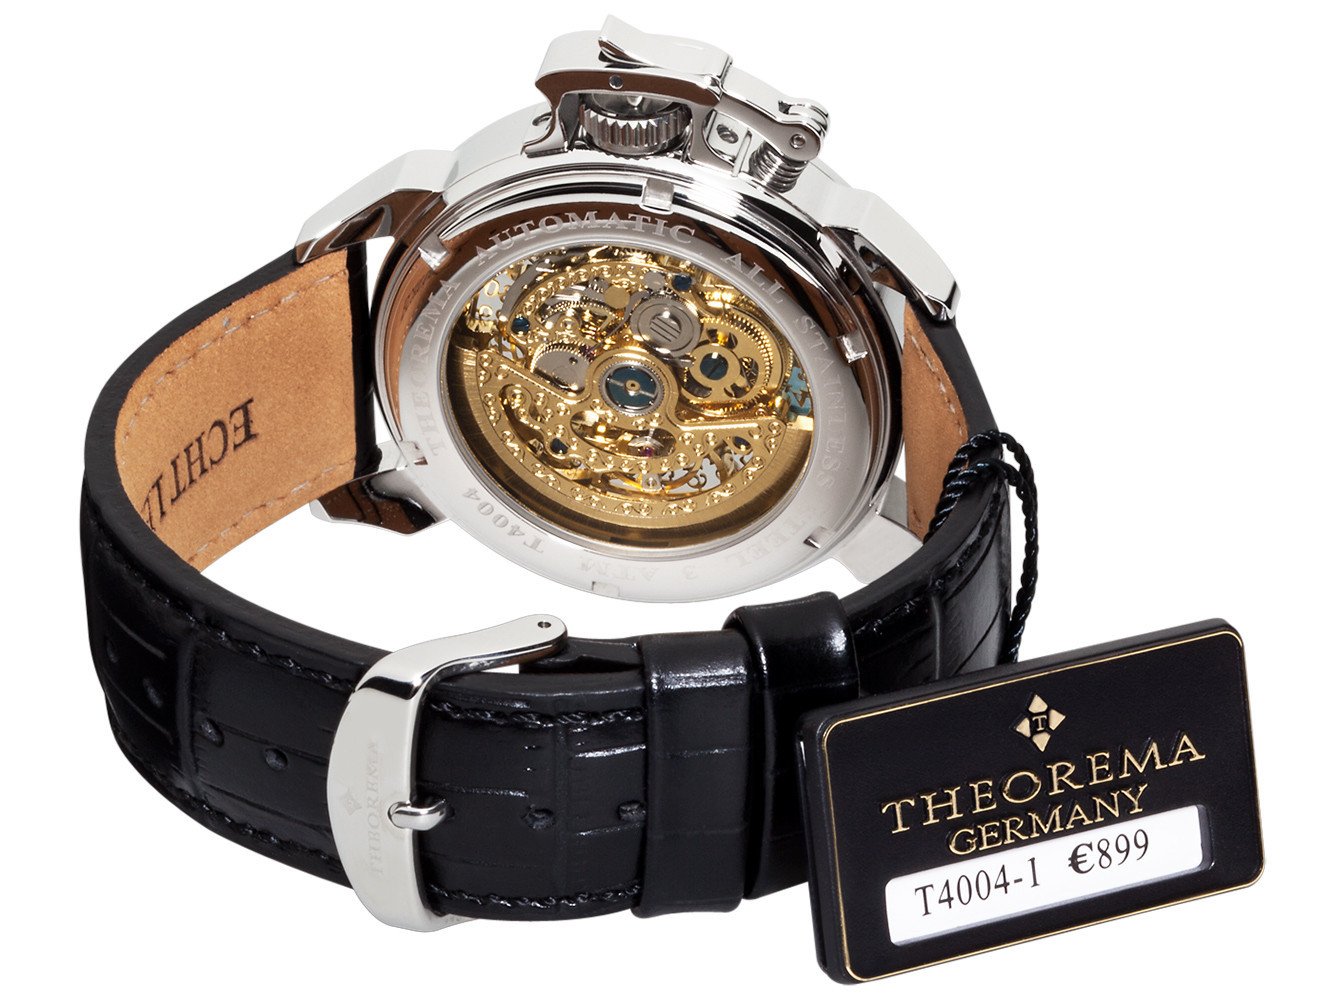 Open back case with gold color mechanism with visible gears and standard buckle for the band.